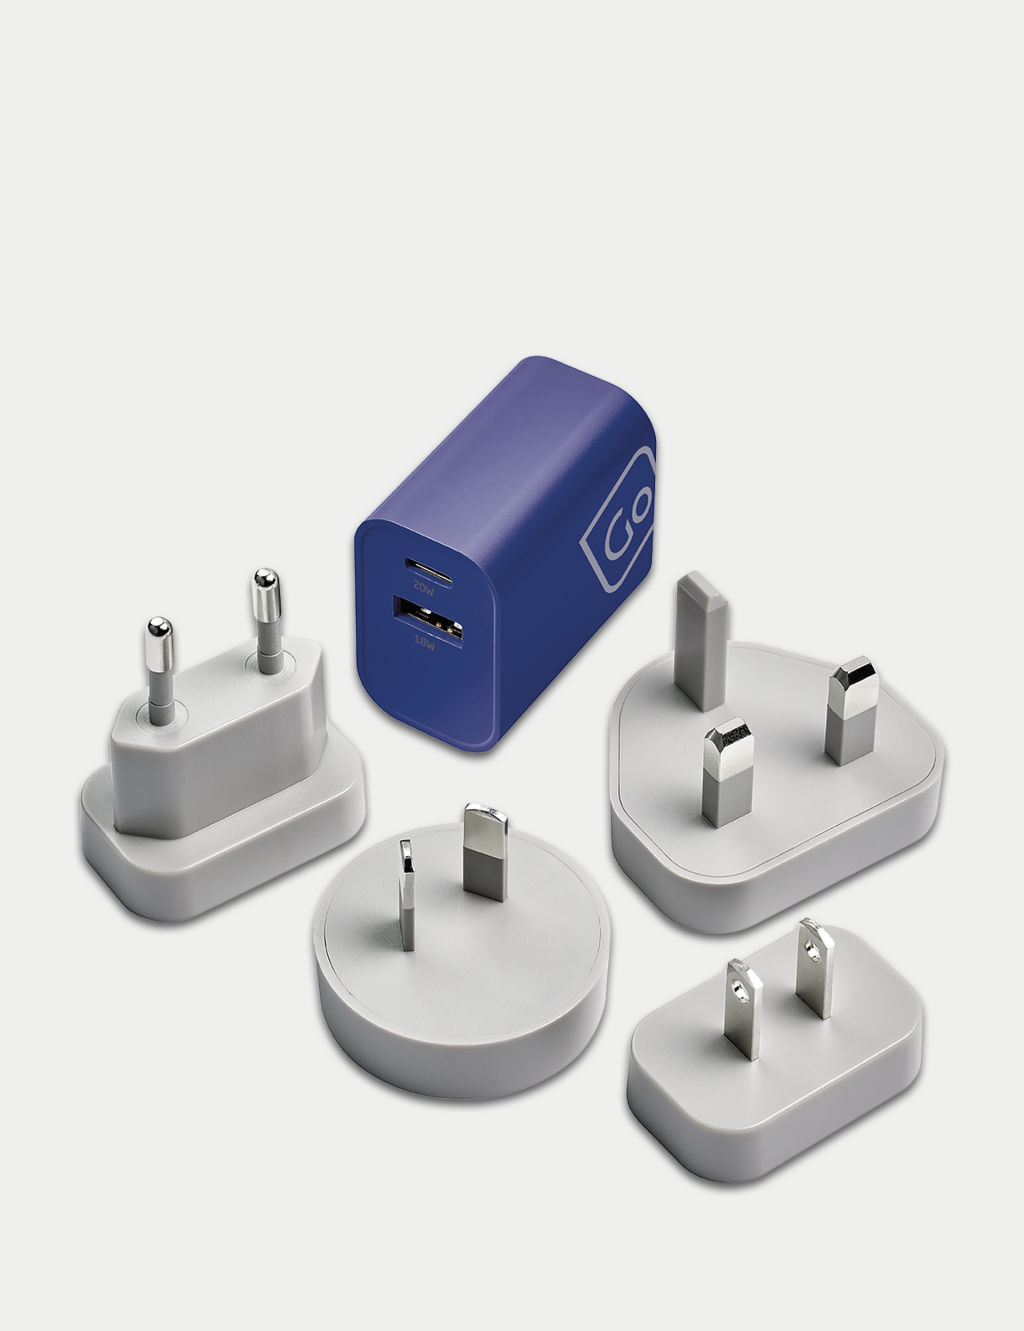 Worldwide USB A & C Charger 3 of 7